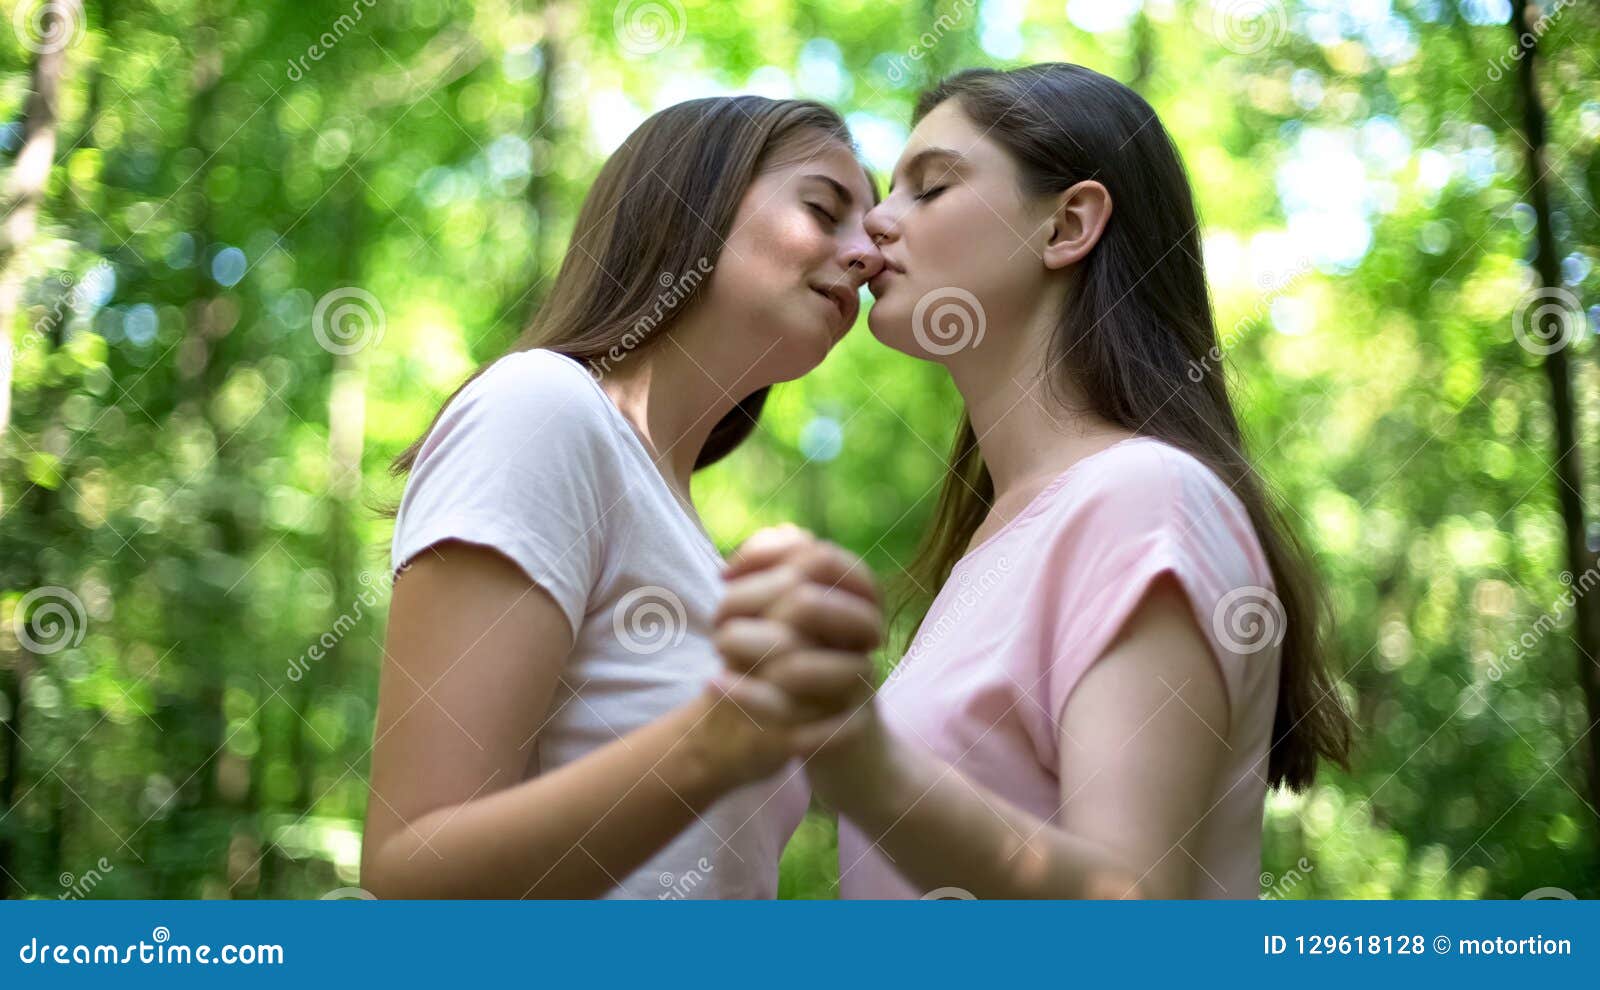 Cute Lesbians Holding Hands And Kissing Support Despite Society